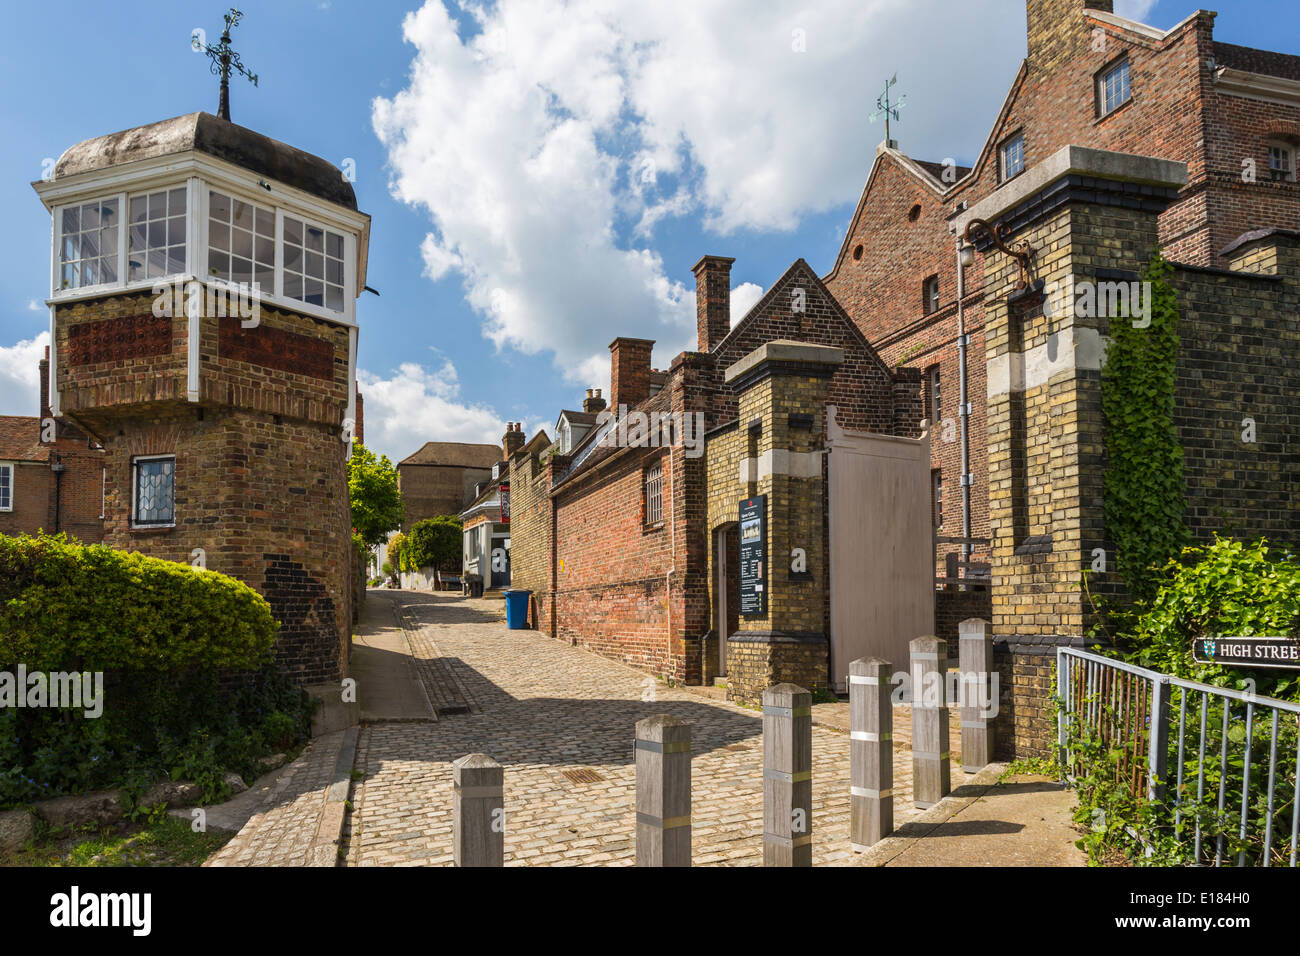 View of High Street in the Village of Upnor showing part of Upnor Castle Stock Photo